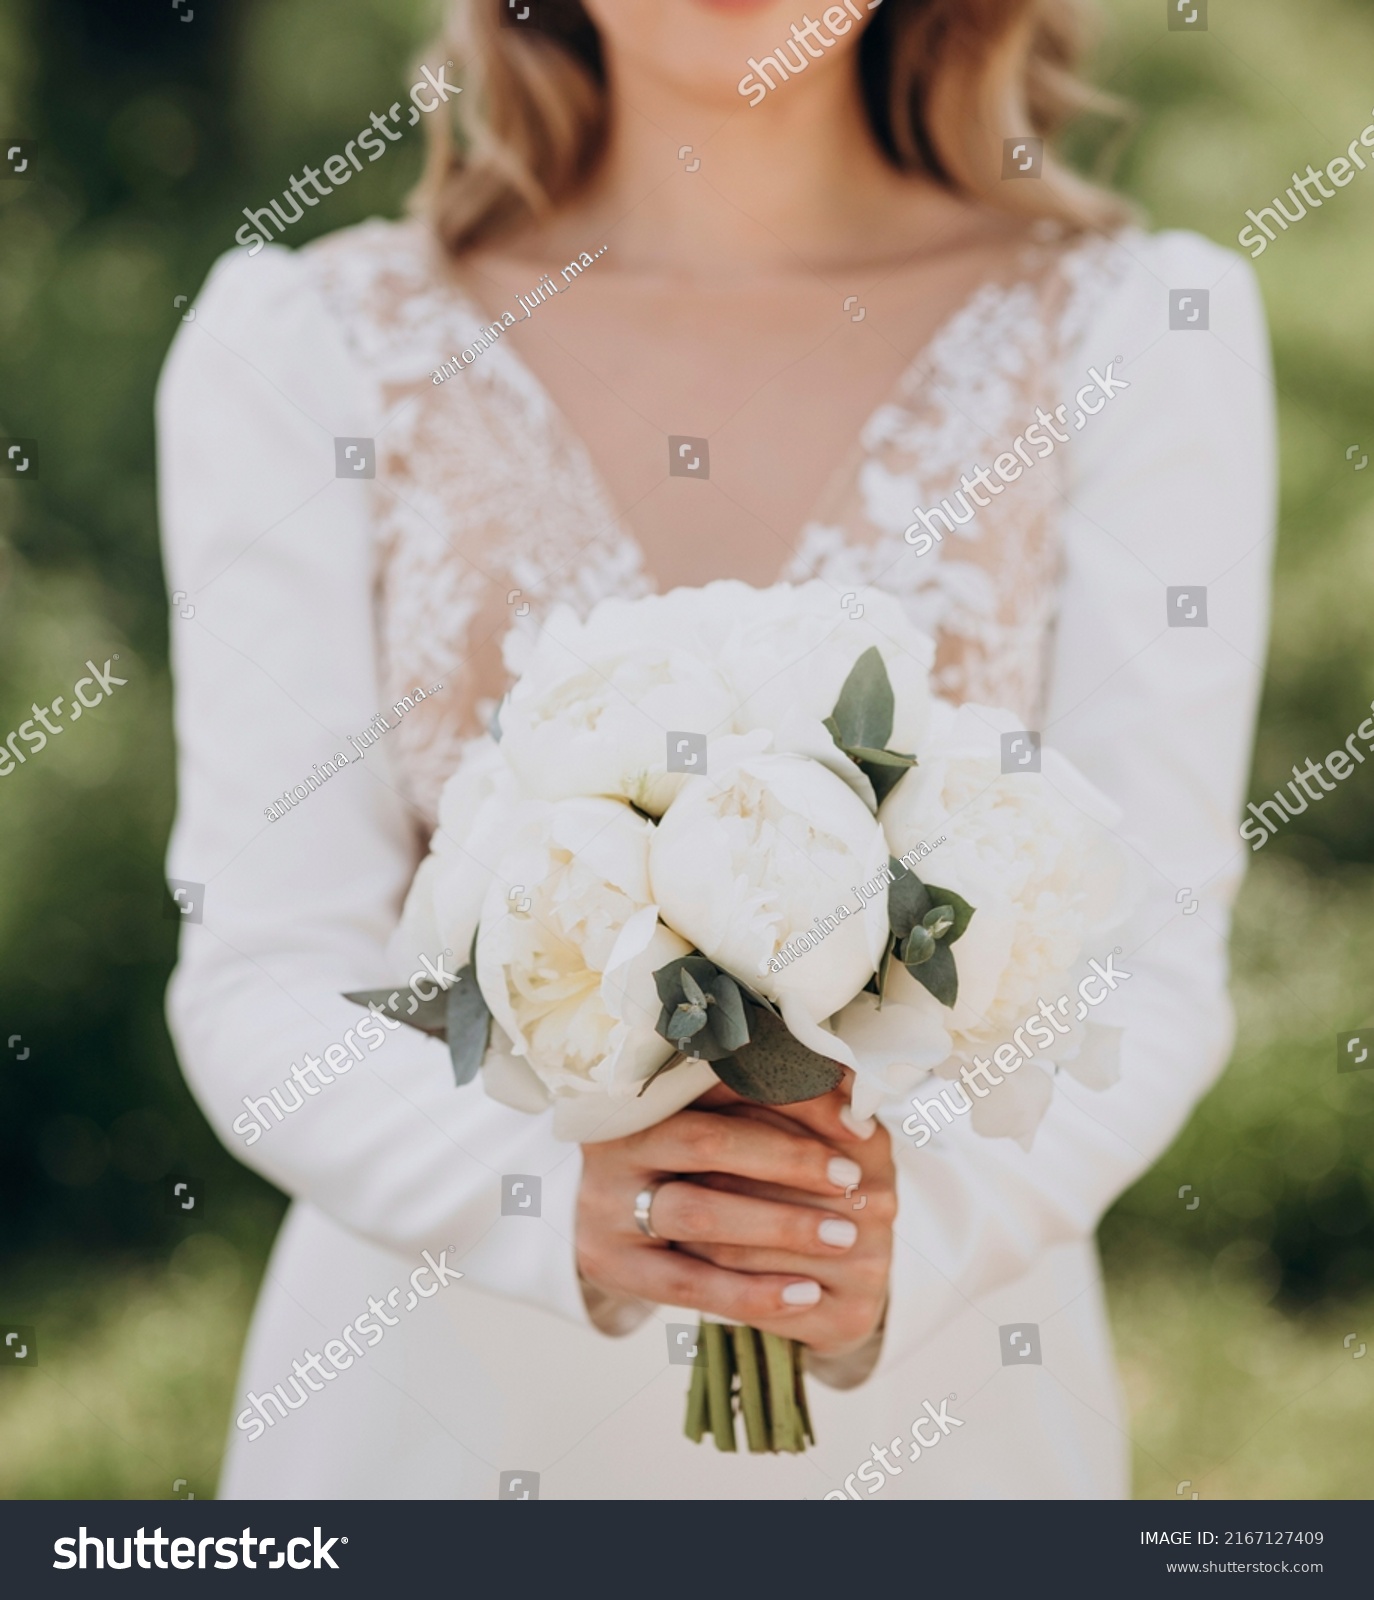 The bride in a white wedding dress is holding a bouquet of white flowers - peonies.. Wedding. Bride and groom. Wedding Dress #2167127409